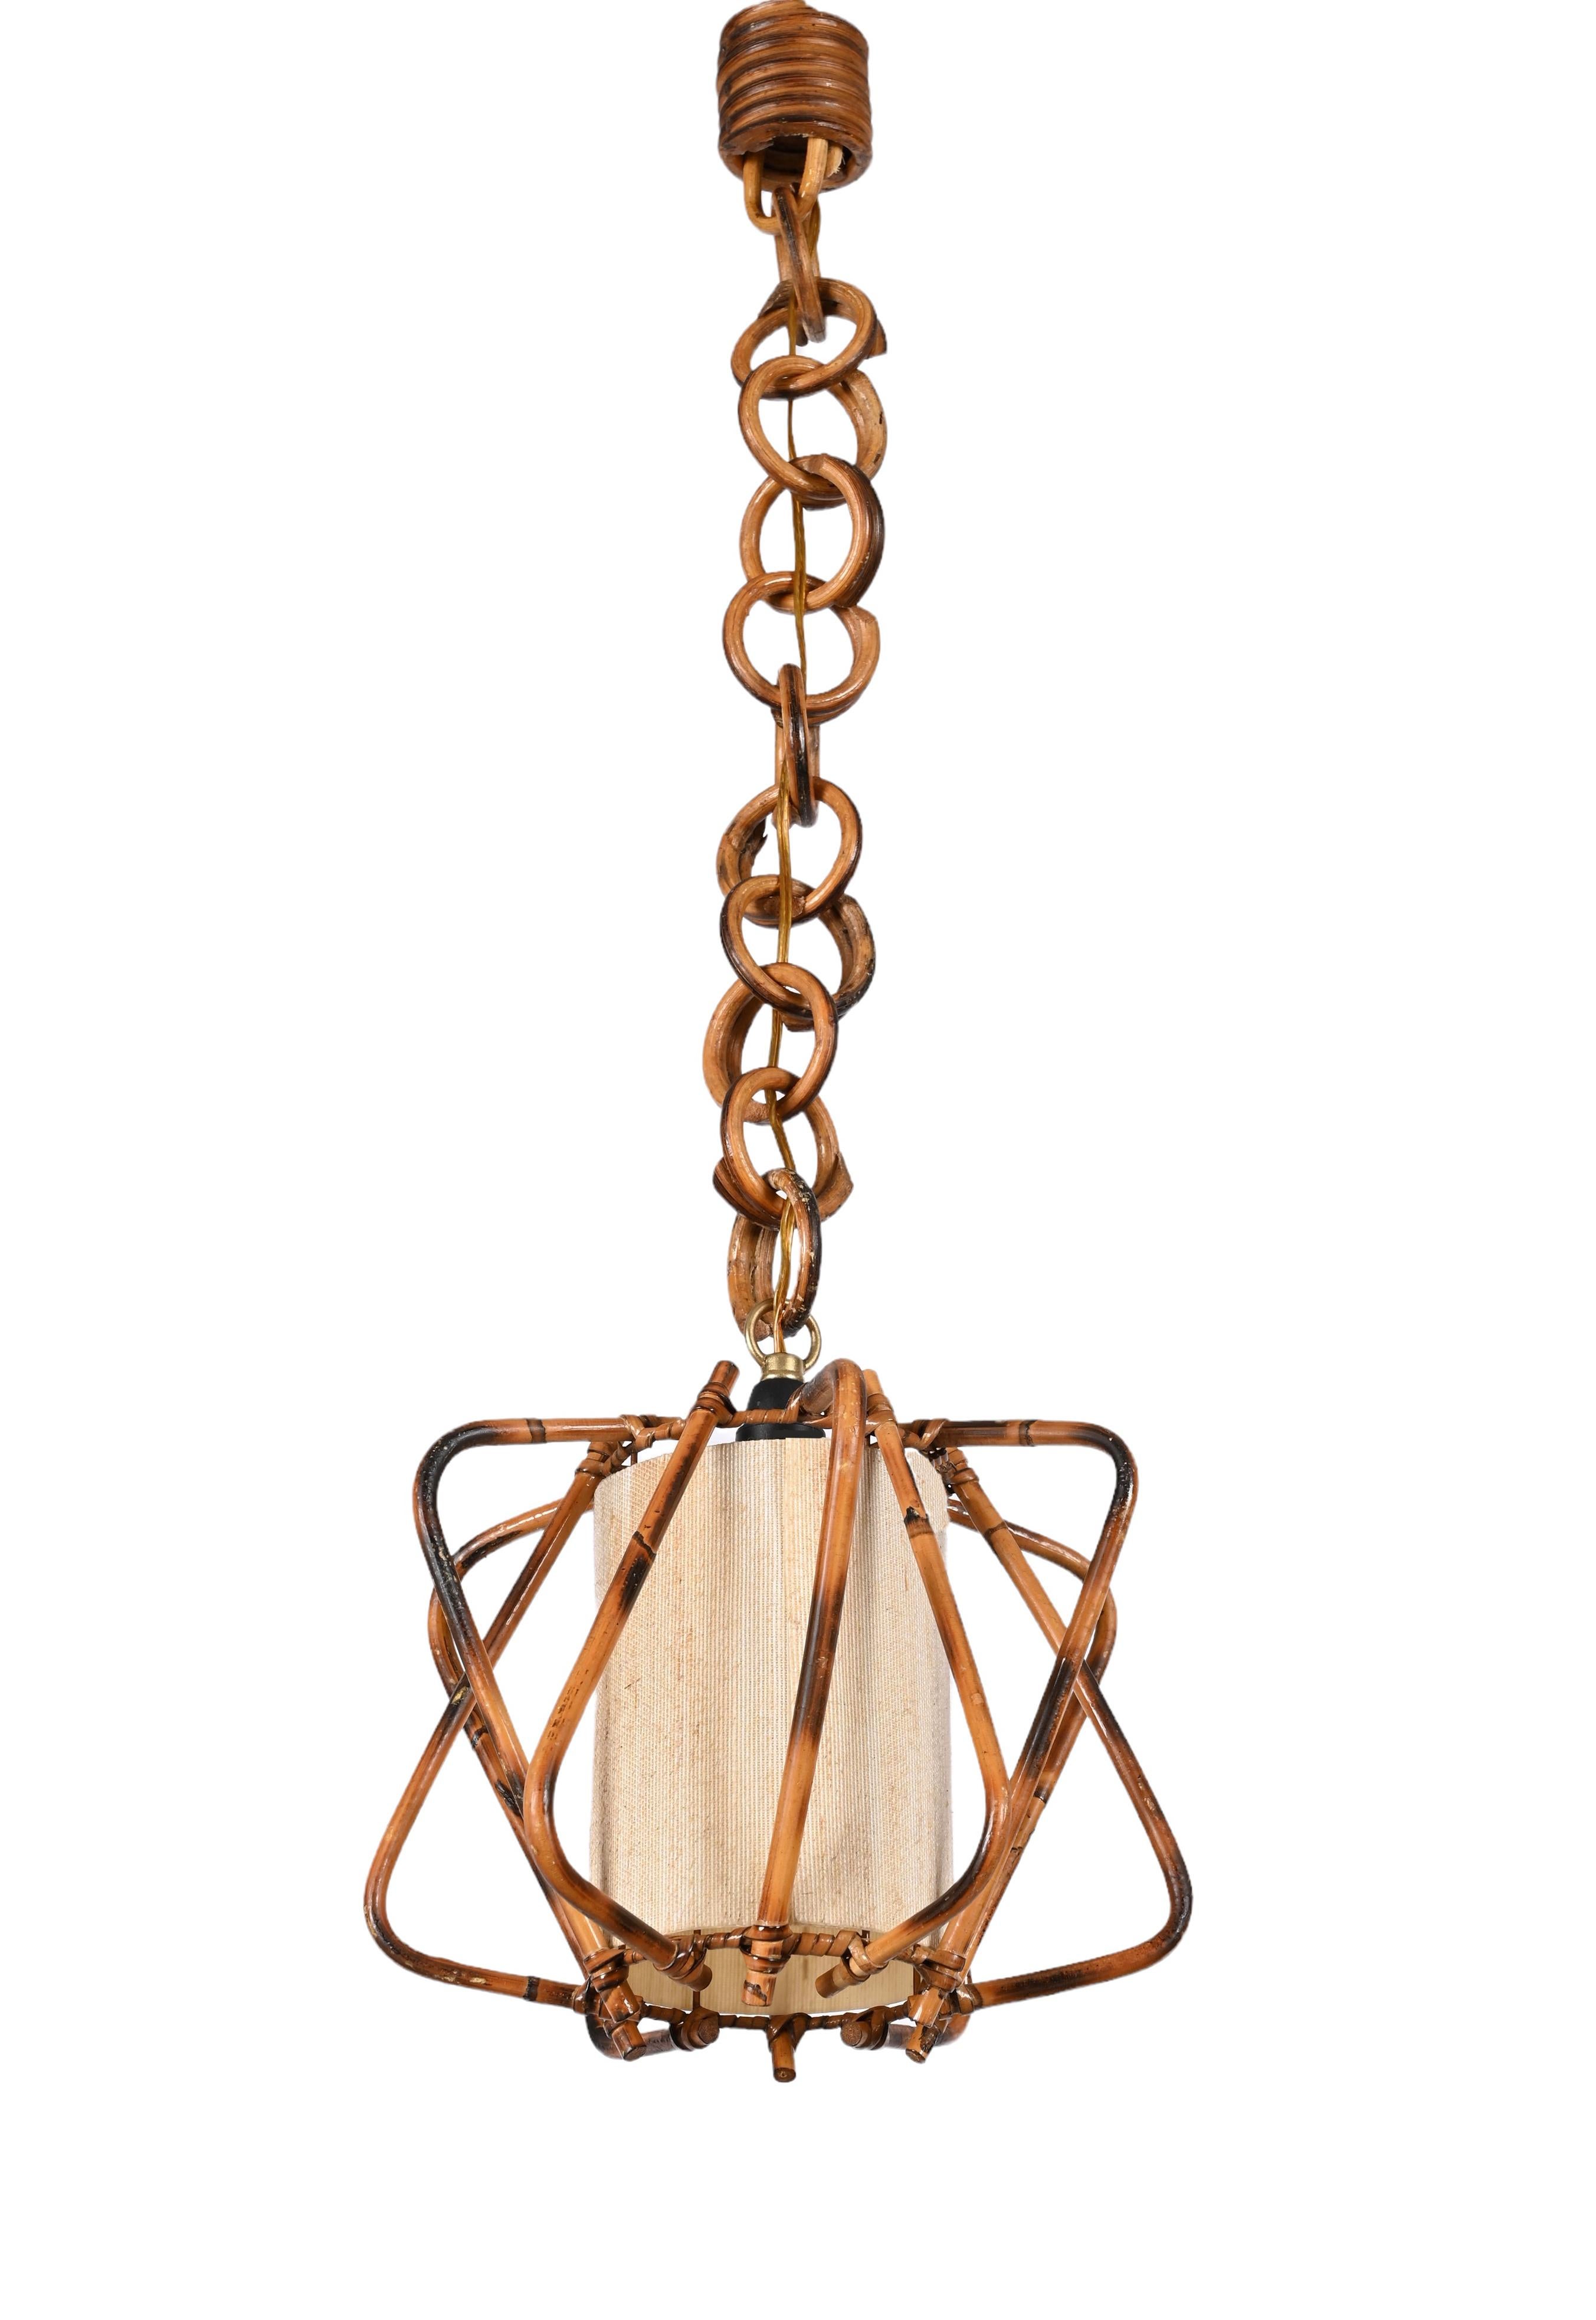 Fantastic midcentury bamboo and rattan chandelier with white cream fabric. Louis Sognot probably designed this extraordinary in France during the 1960s.

This item is a crystalline example of midcentury craftsmanship, with bamboo and rattan